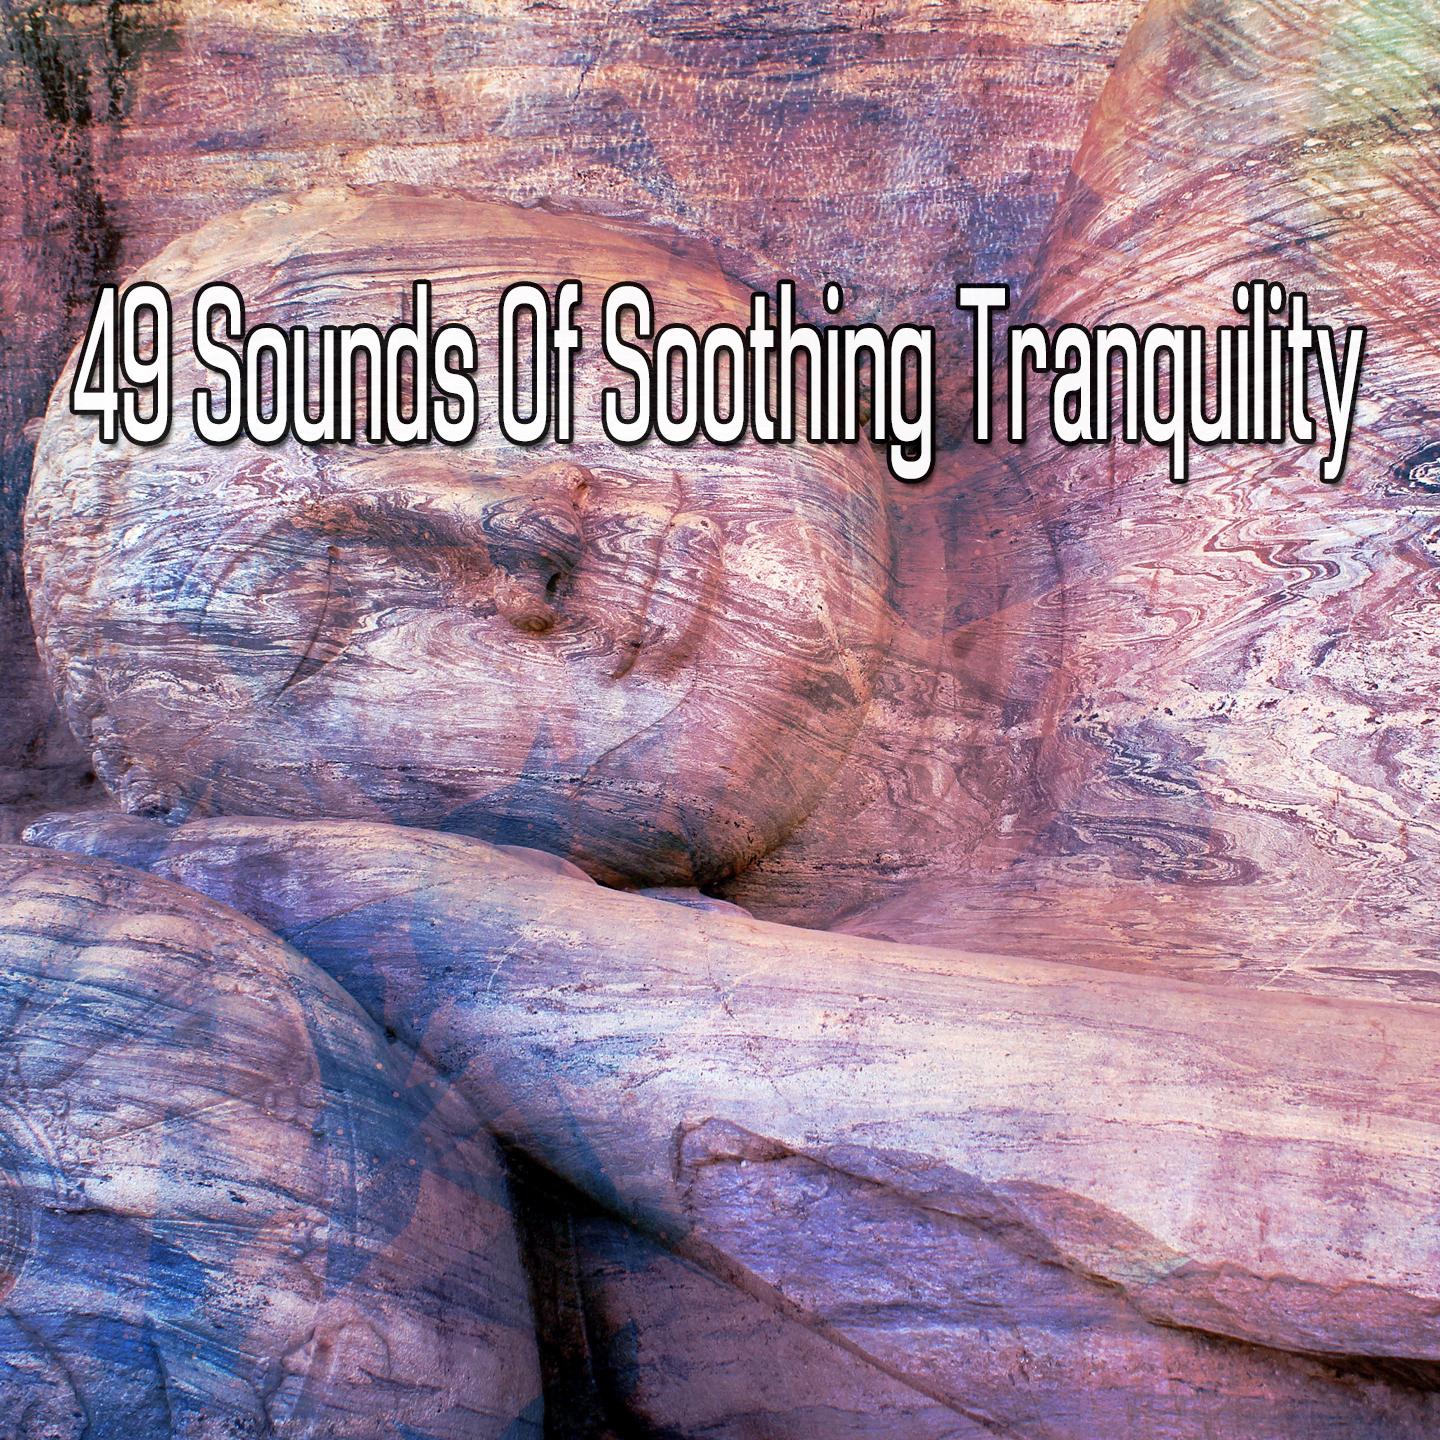 49 Sounds Of Soothing Tranquility